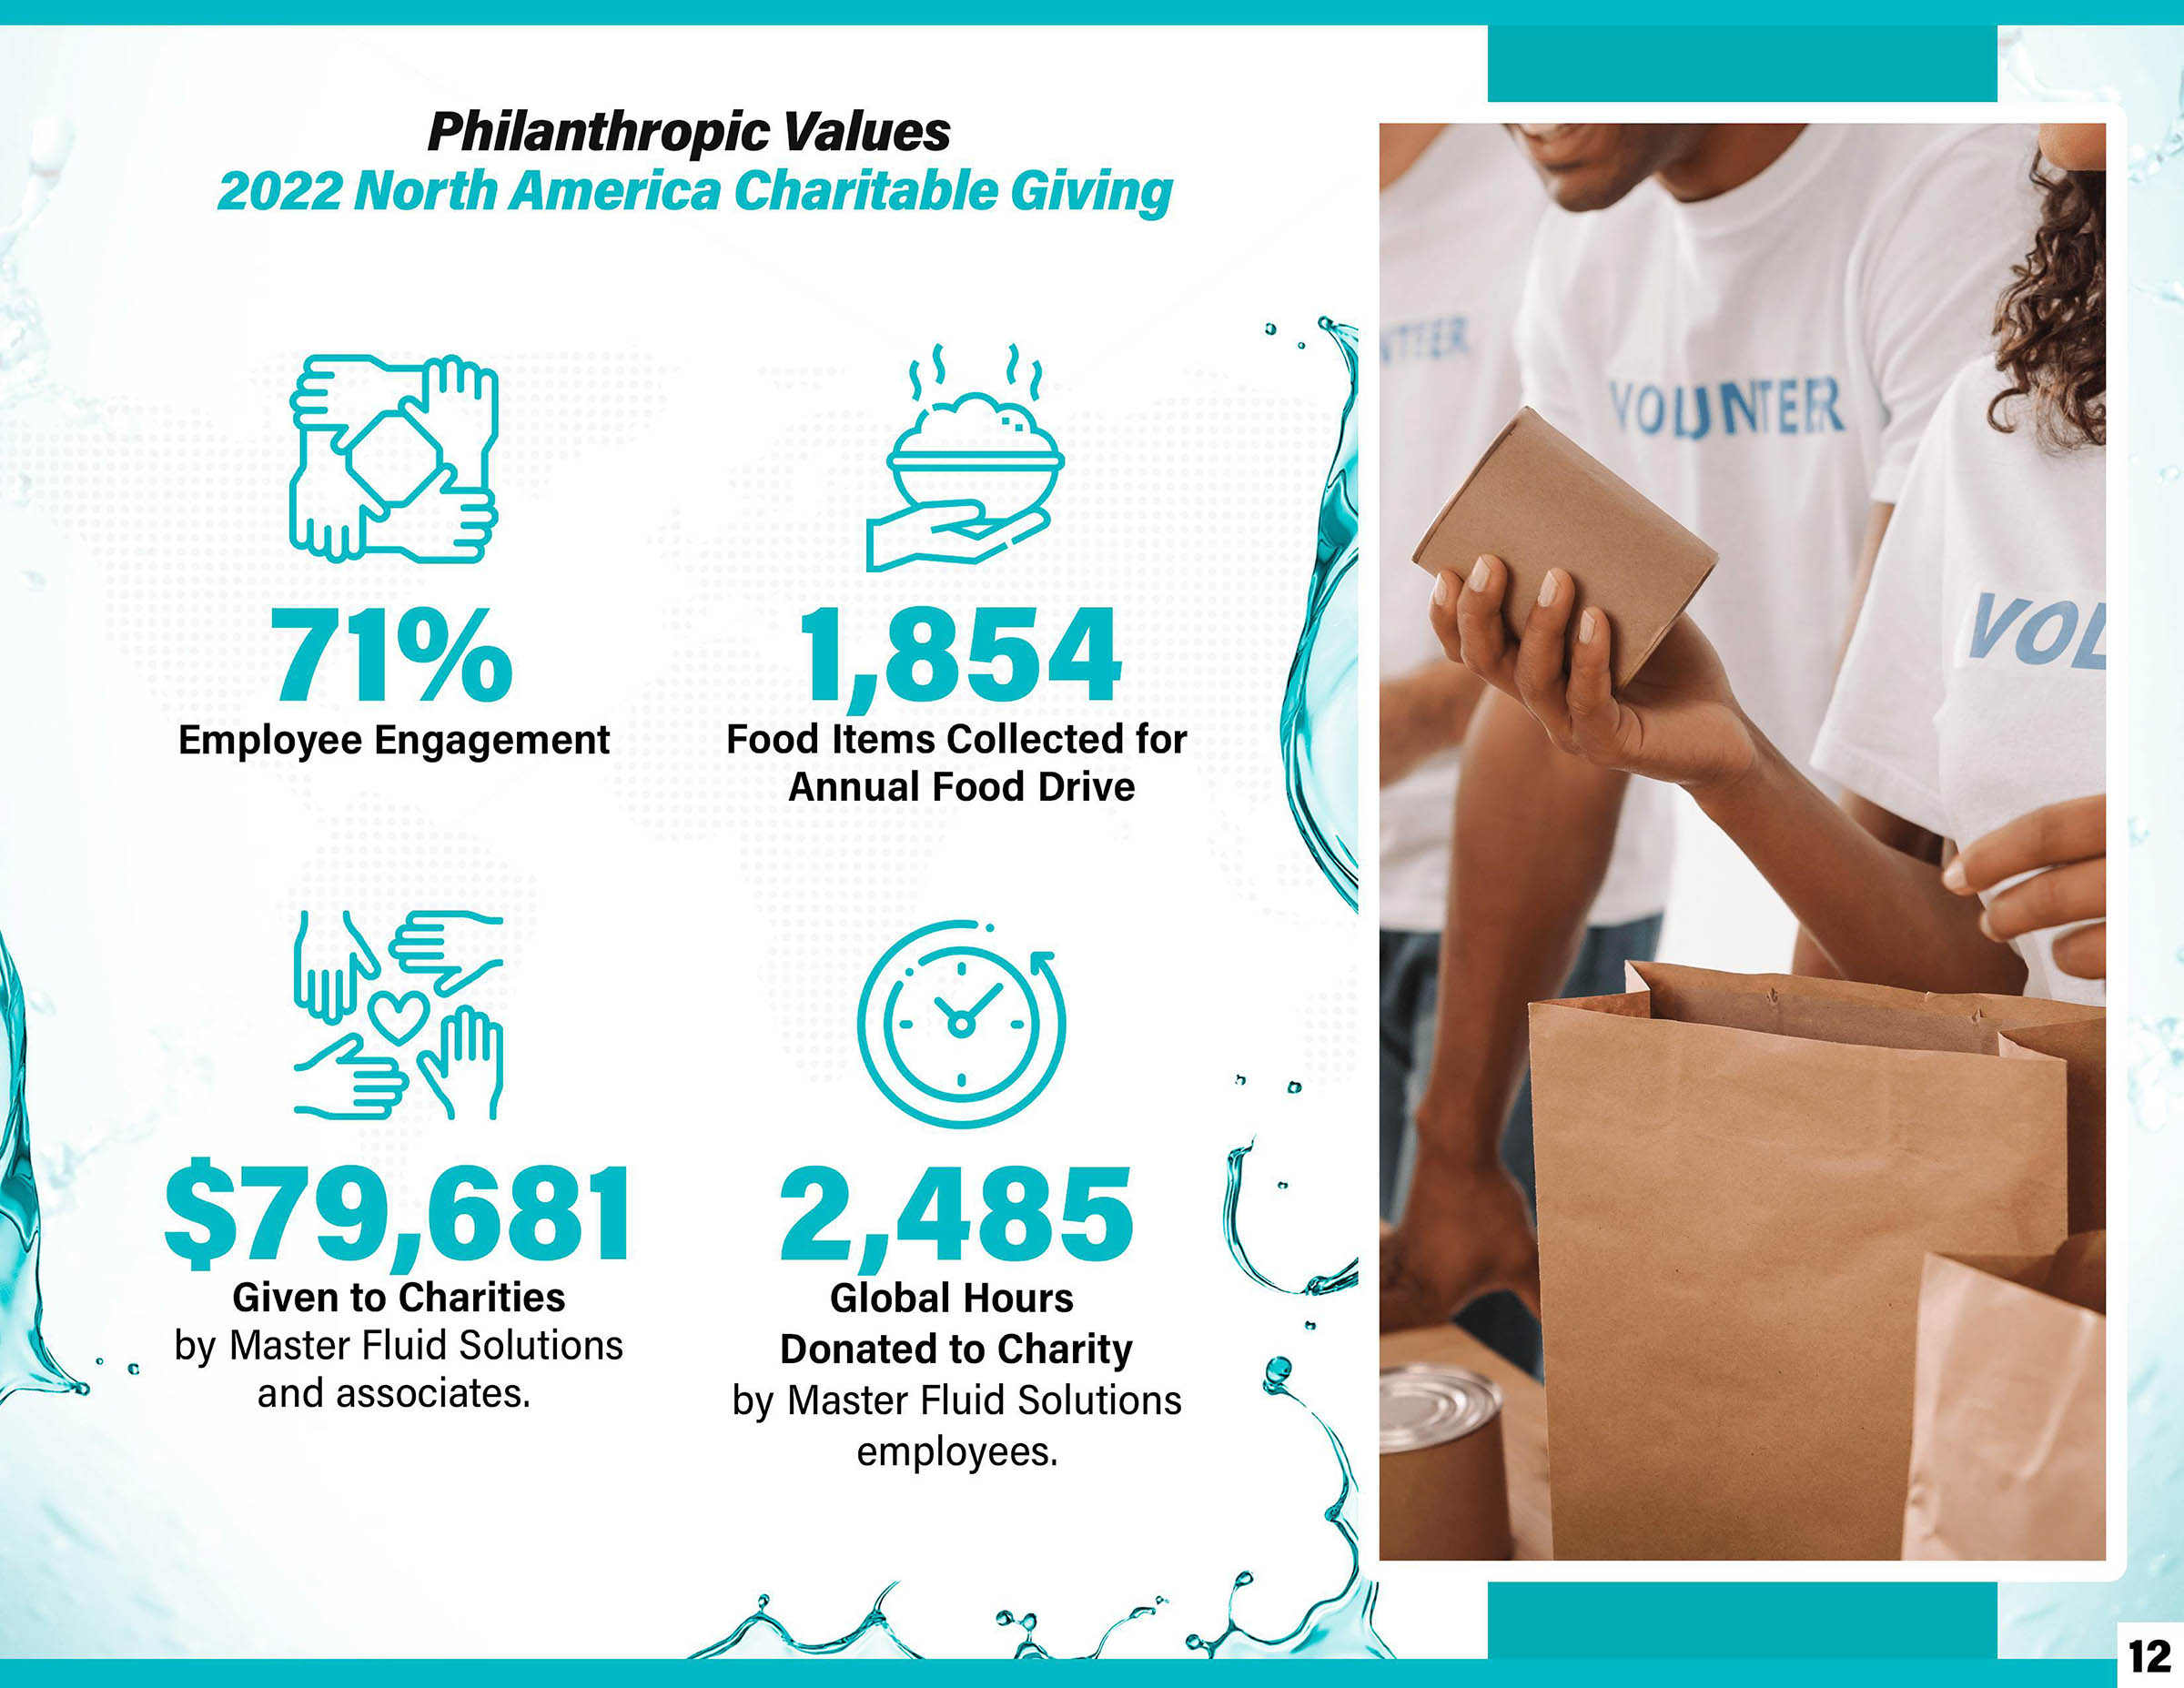 Sustainability Report - Philanthropic Values, 2022 Noth American Charitable Giving